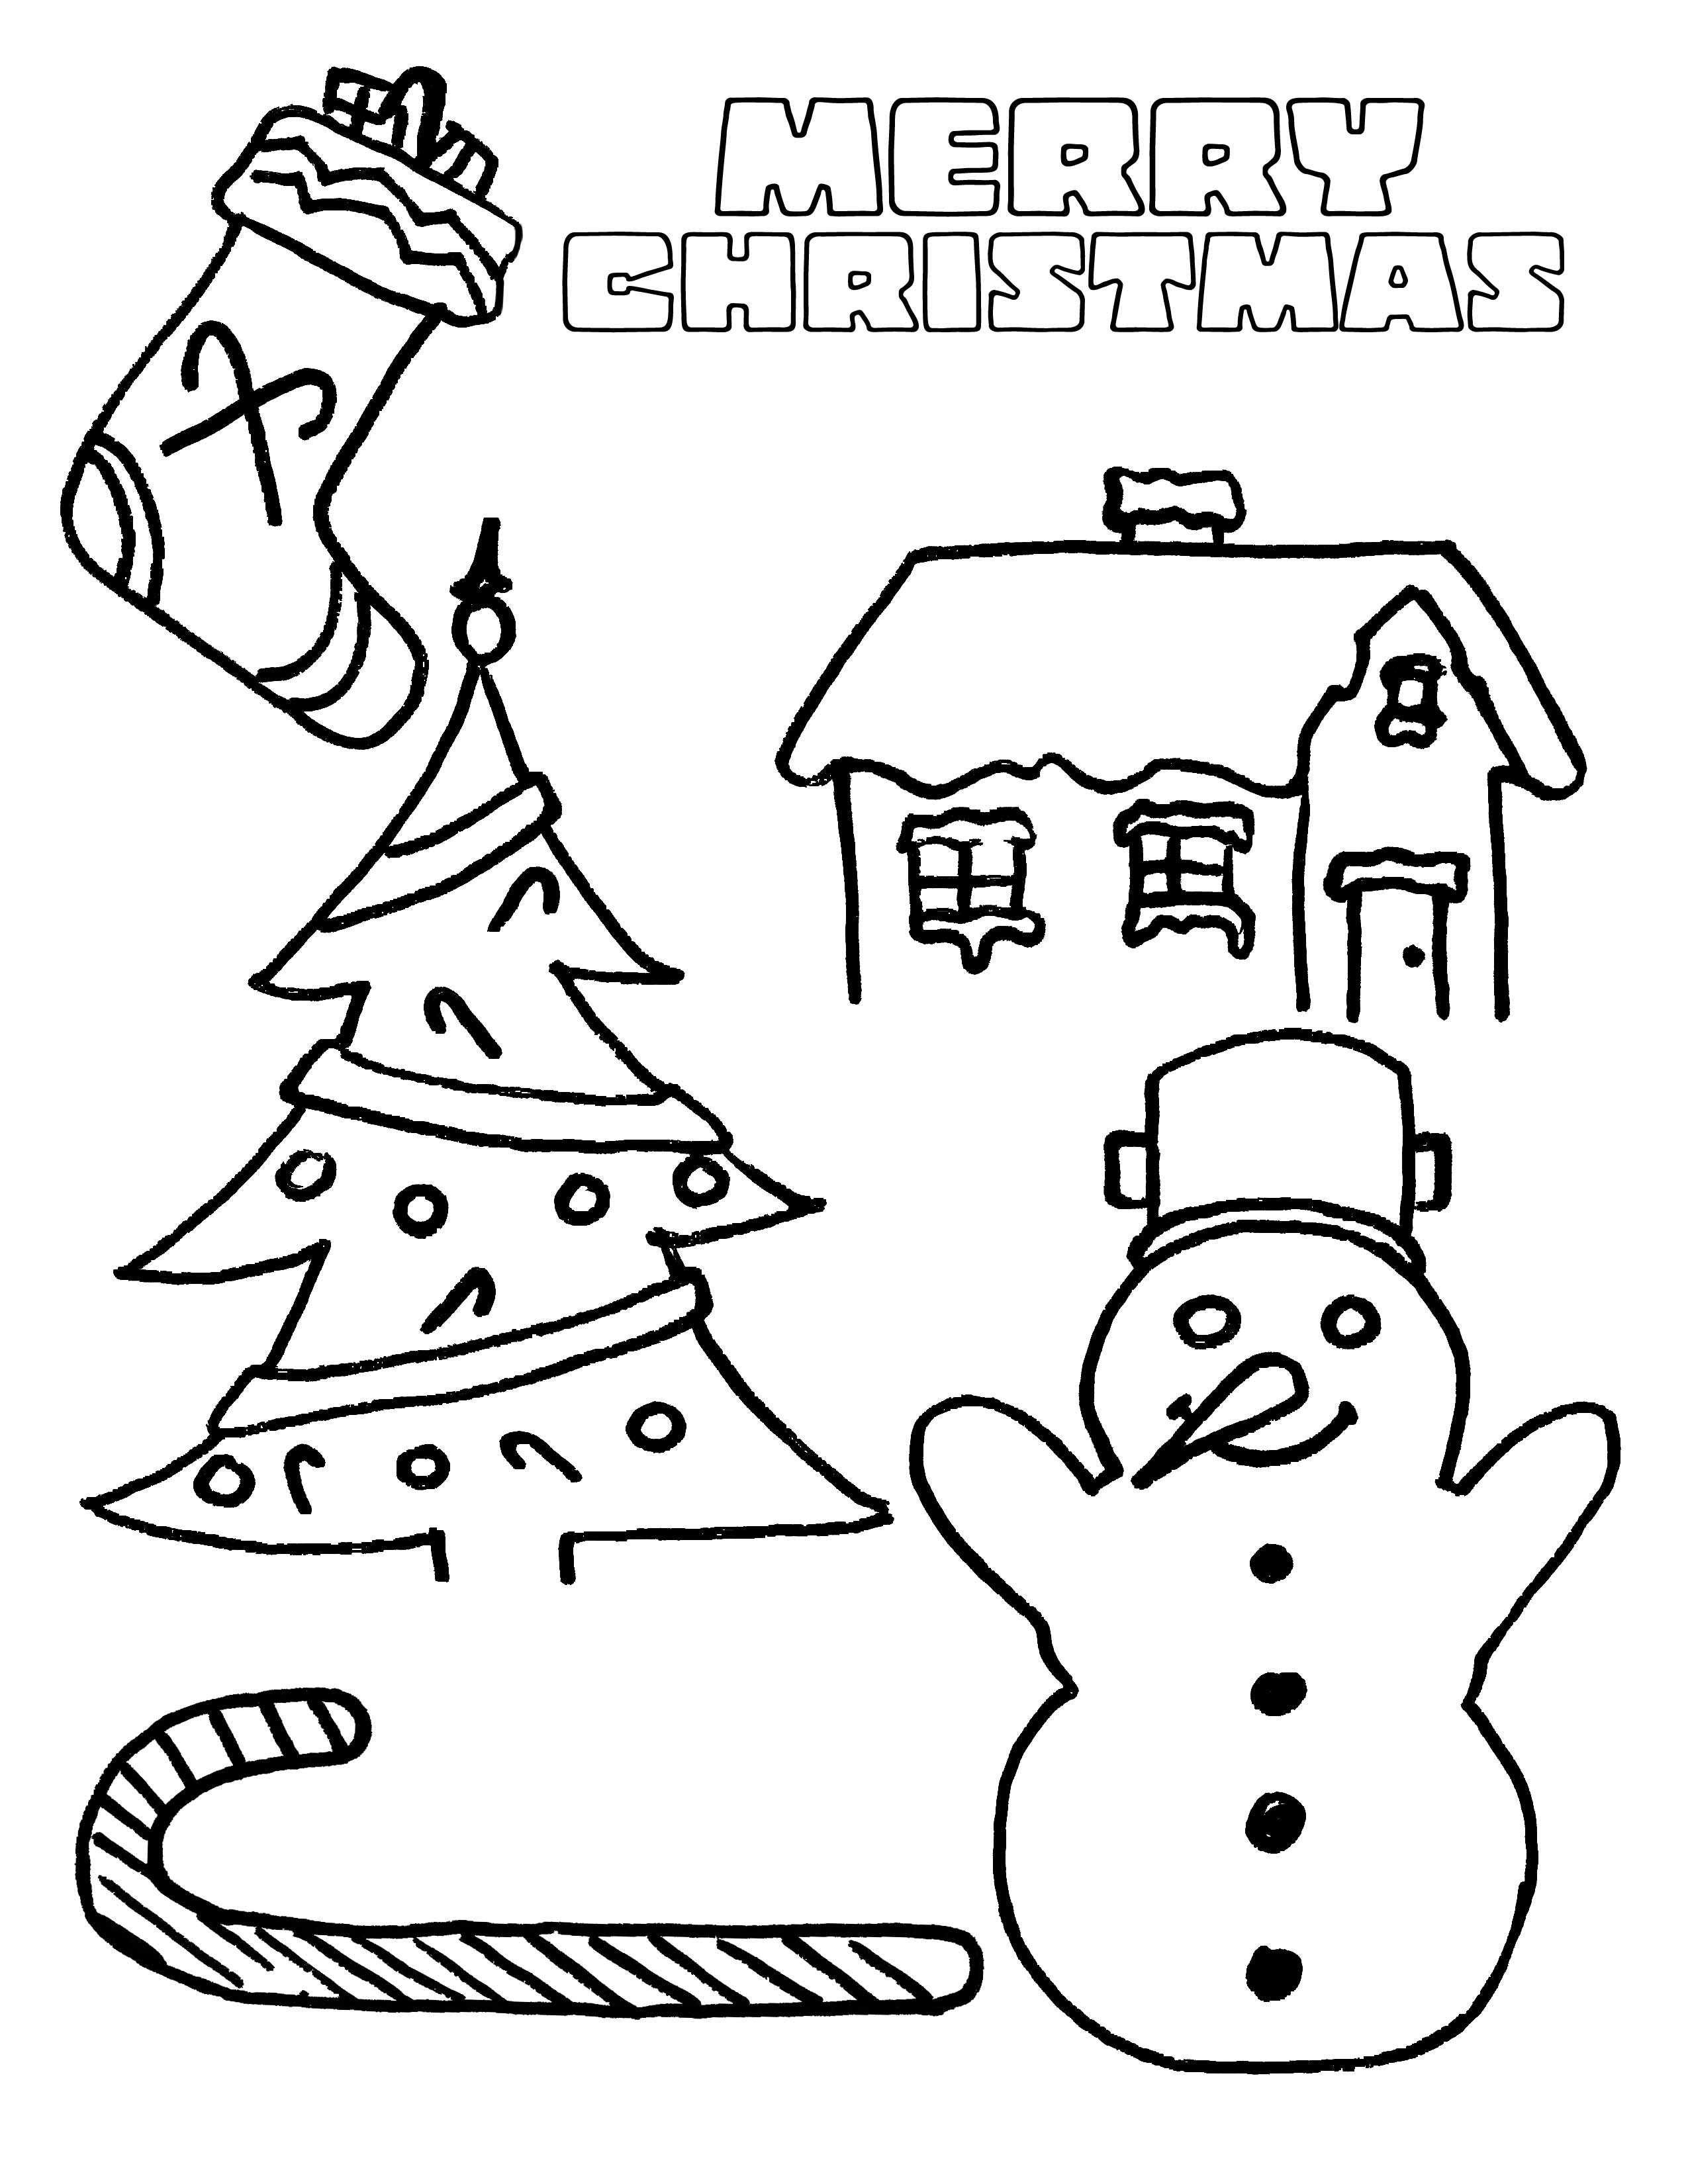 Coloring Pages : Coloring Pages Christmas Sheets For Kids Bingo - Free Printable Christmas Coloring Pages And Activities